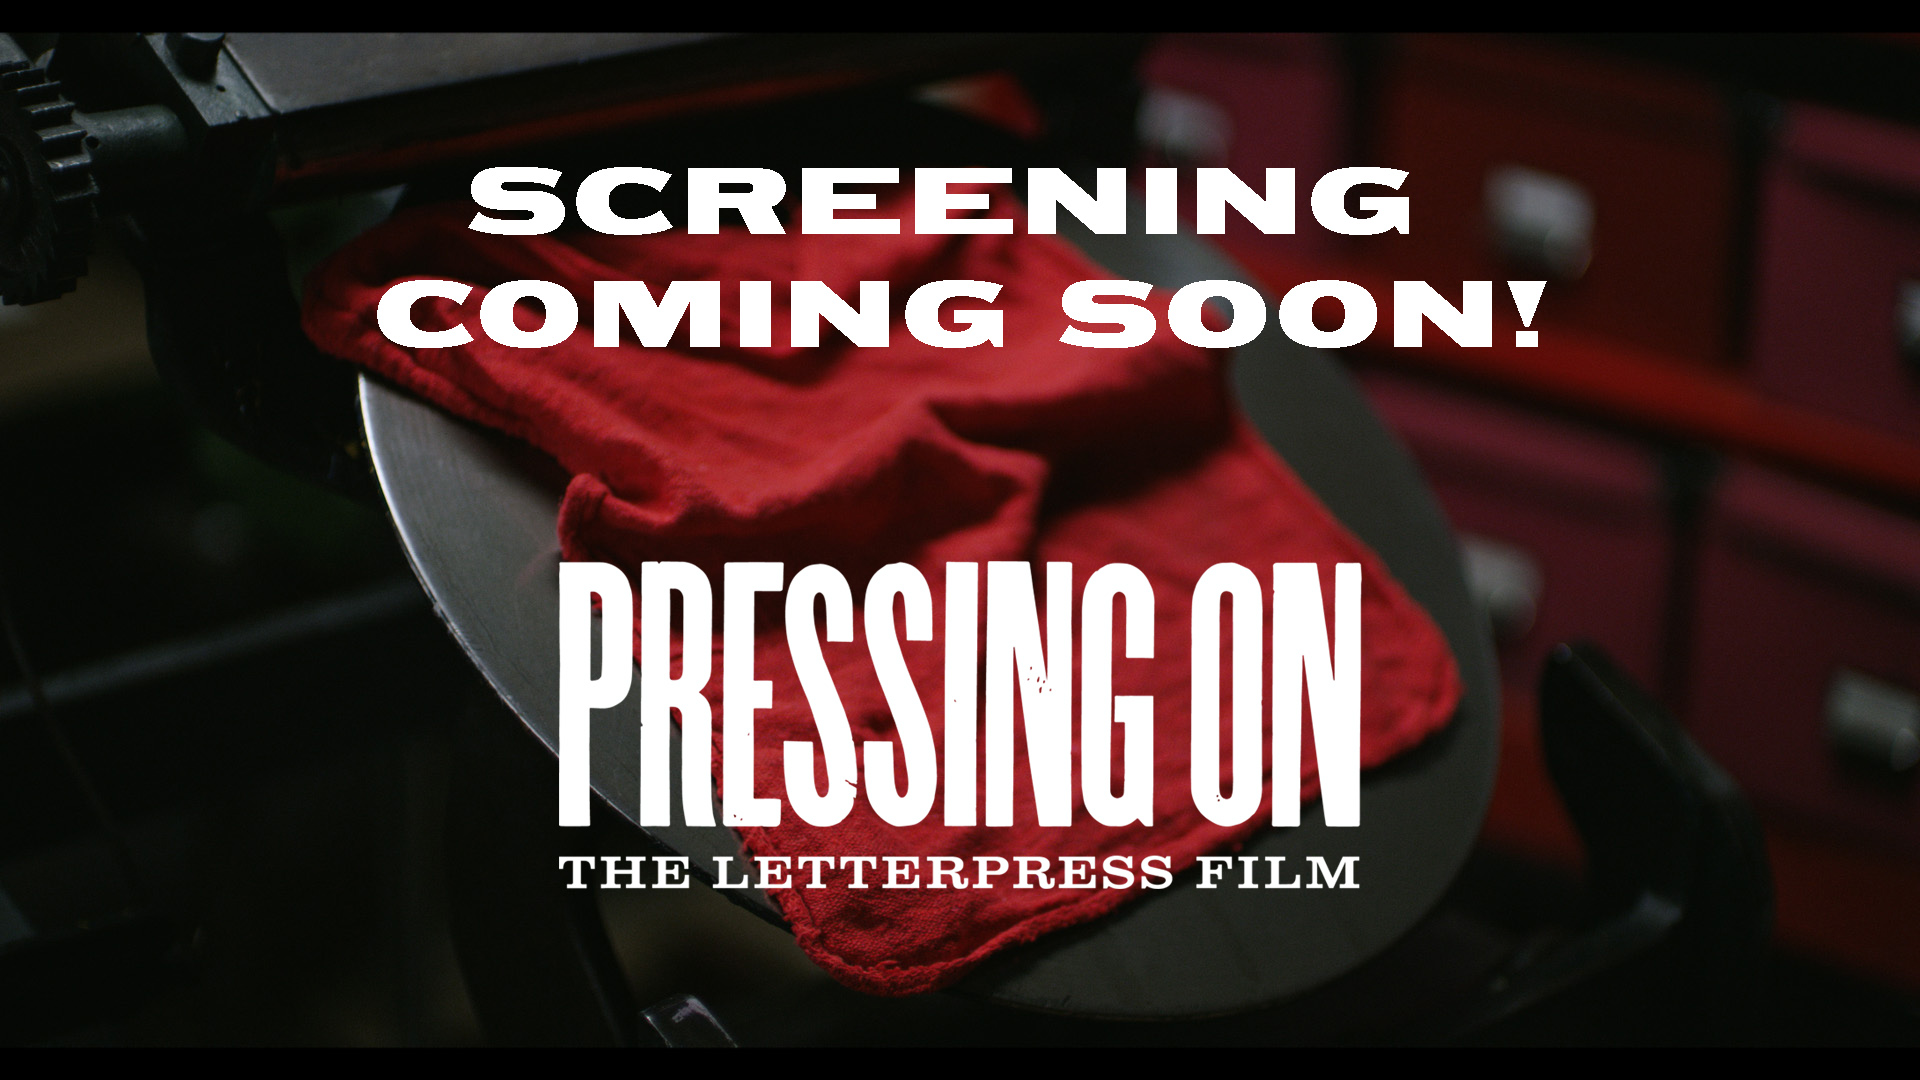 January 13 at 1 pm,             THE AUSTIN PREMIER :          a special screening of the documentary               PRESSING ON: THE LETTERPRESS FILM